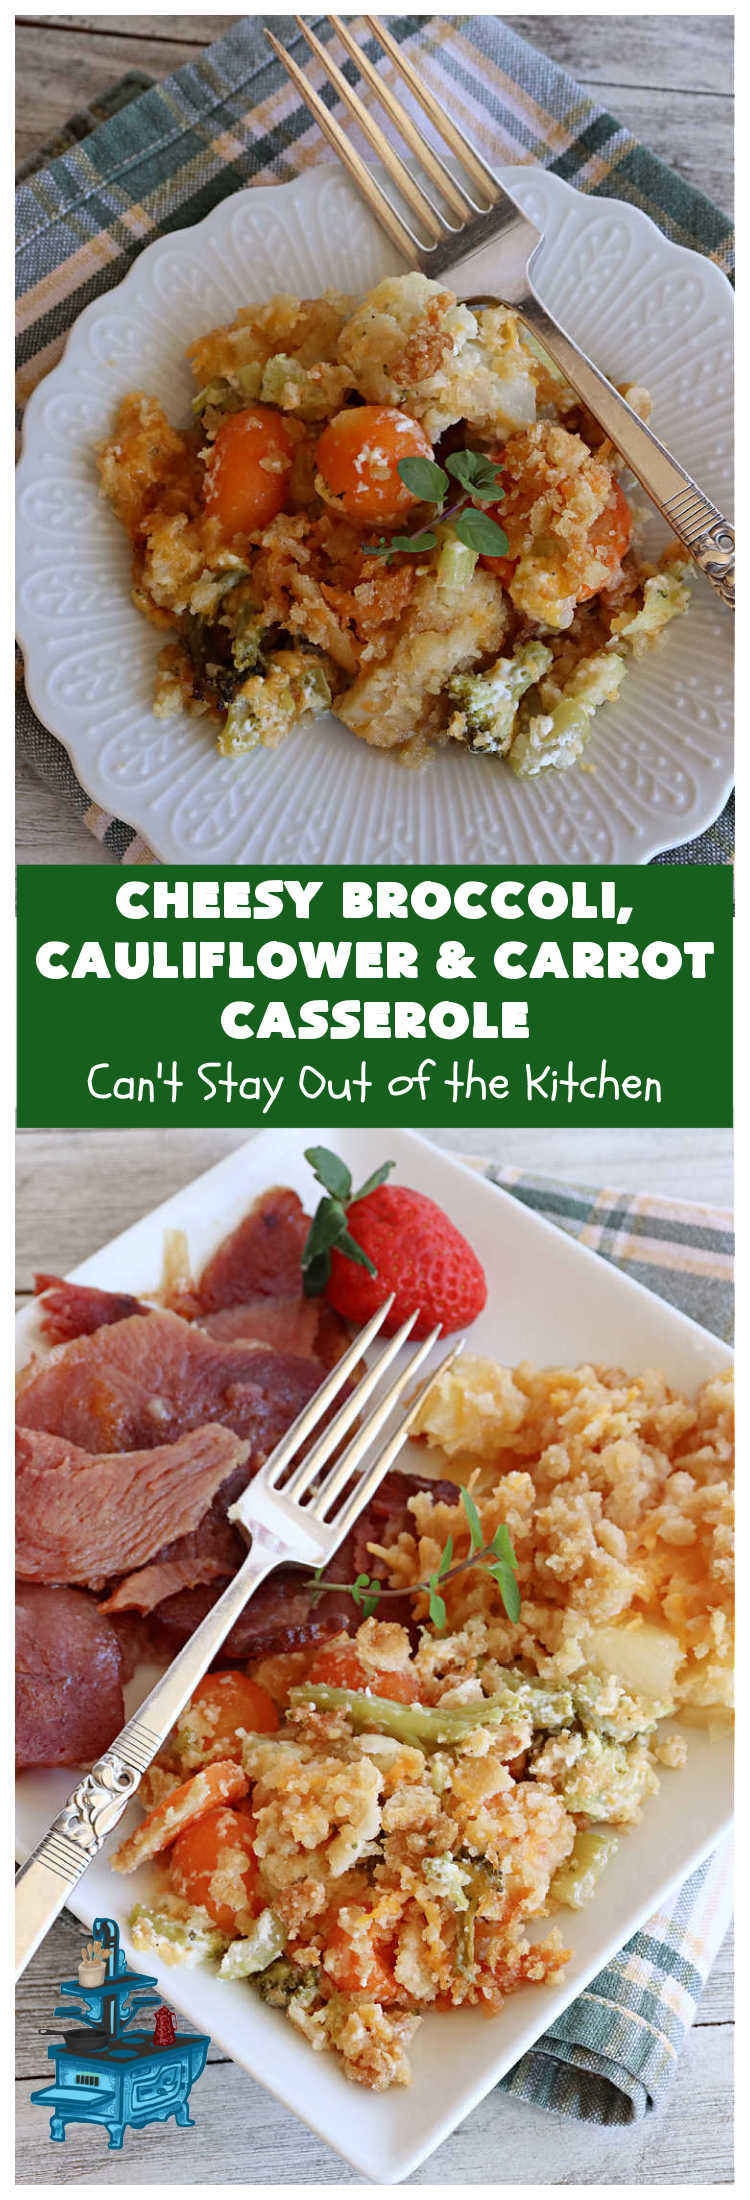 Cheesy Broccoli, Cauliflower and Carrot Casserole | Can't Stay Out of the Kitchen | this tasty #SideDish includes #broccoli, #carrots #cauliflower & #celery in a tasty #CheddarCheese sauce topped with #RitzCrackers & more #cheese. It's marvelous for #holiday or company dinners like #Easter, #MothersDay or #FathersDay. #casserole #CheesyBroccoliCauliflowerAndCarrotCasserole #vegetableCheesy Broccoli, Cauliflower and Carrot Casserole | Can't Stay Out of the Kitchen | this tasty #SideDish includes #broccoli, #carrots #cauliflower & #celery in a tasty #CheddarCheese sauce topped with #RitzCrackers & more #cheese. It's marvelous for #holiday or company dinners like #Easter, #MothersDay or #FathersDay. #casserole #CheesyBroccoliCauliflowerAndCarrotCasserole #vegetable